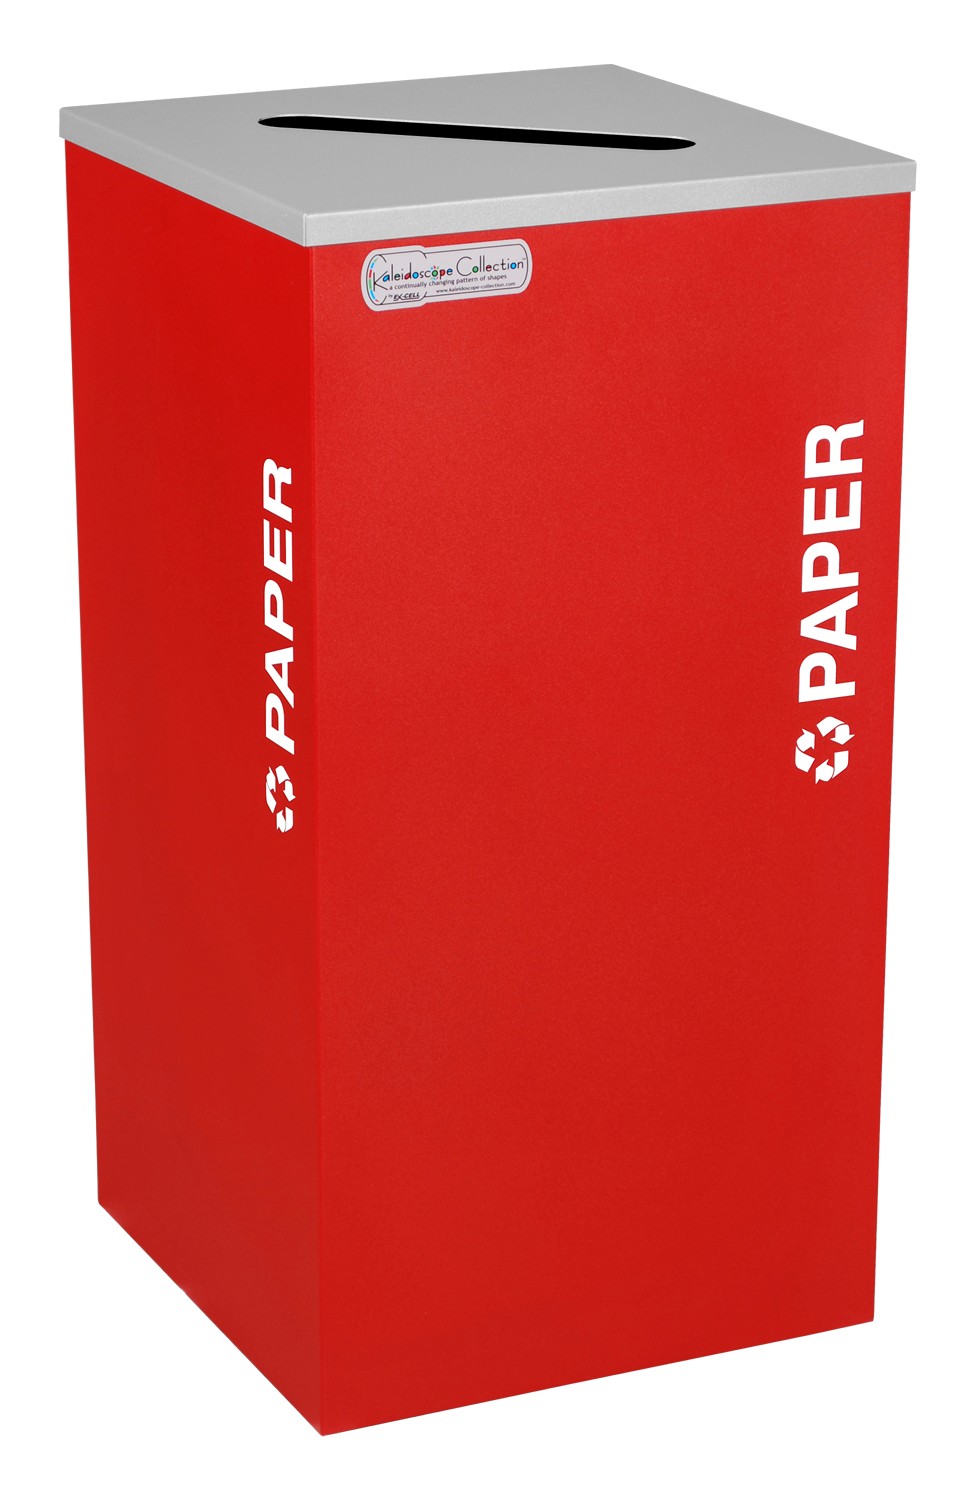 Picture of Ex-Cell Kaiser RC-KDSQ-P RBX 18-gal recycling recptacle- square top and Plastic decal- Ruby Texture finish